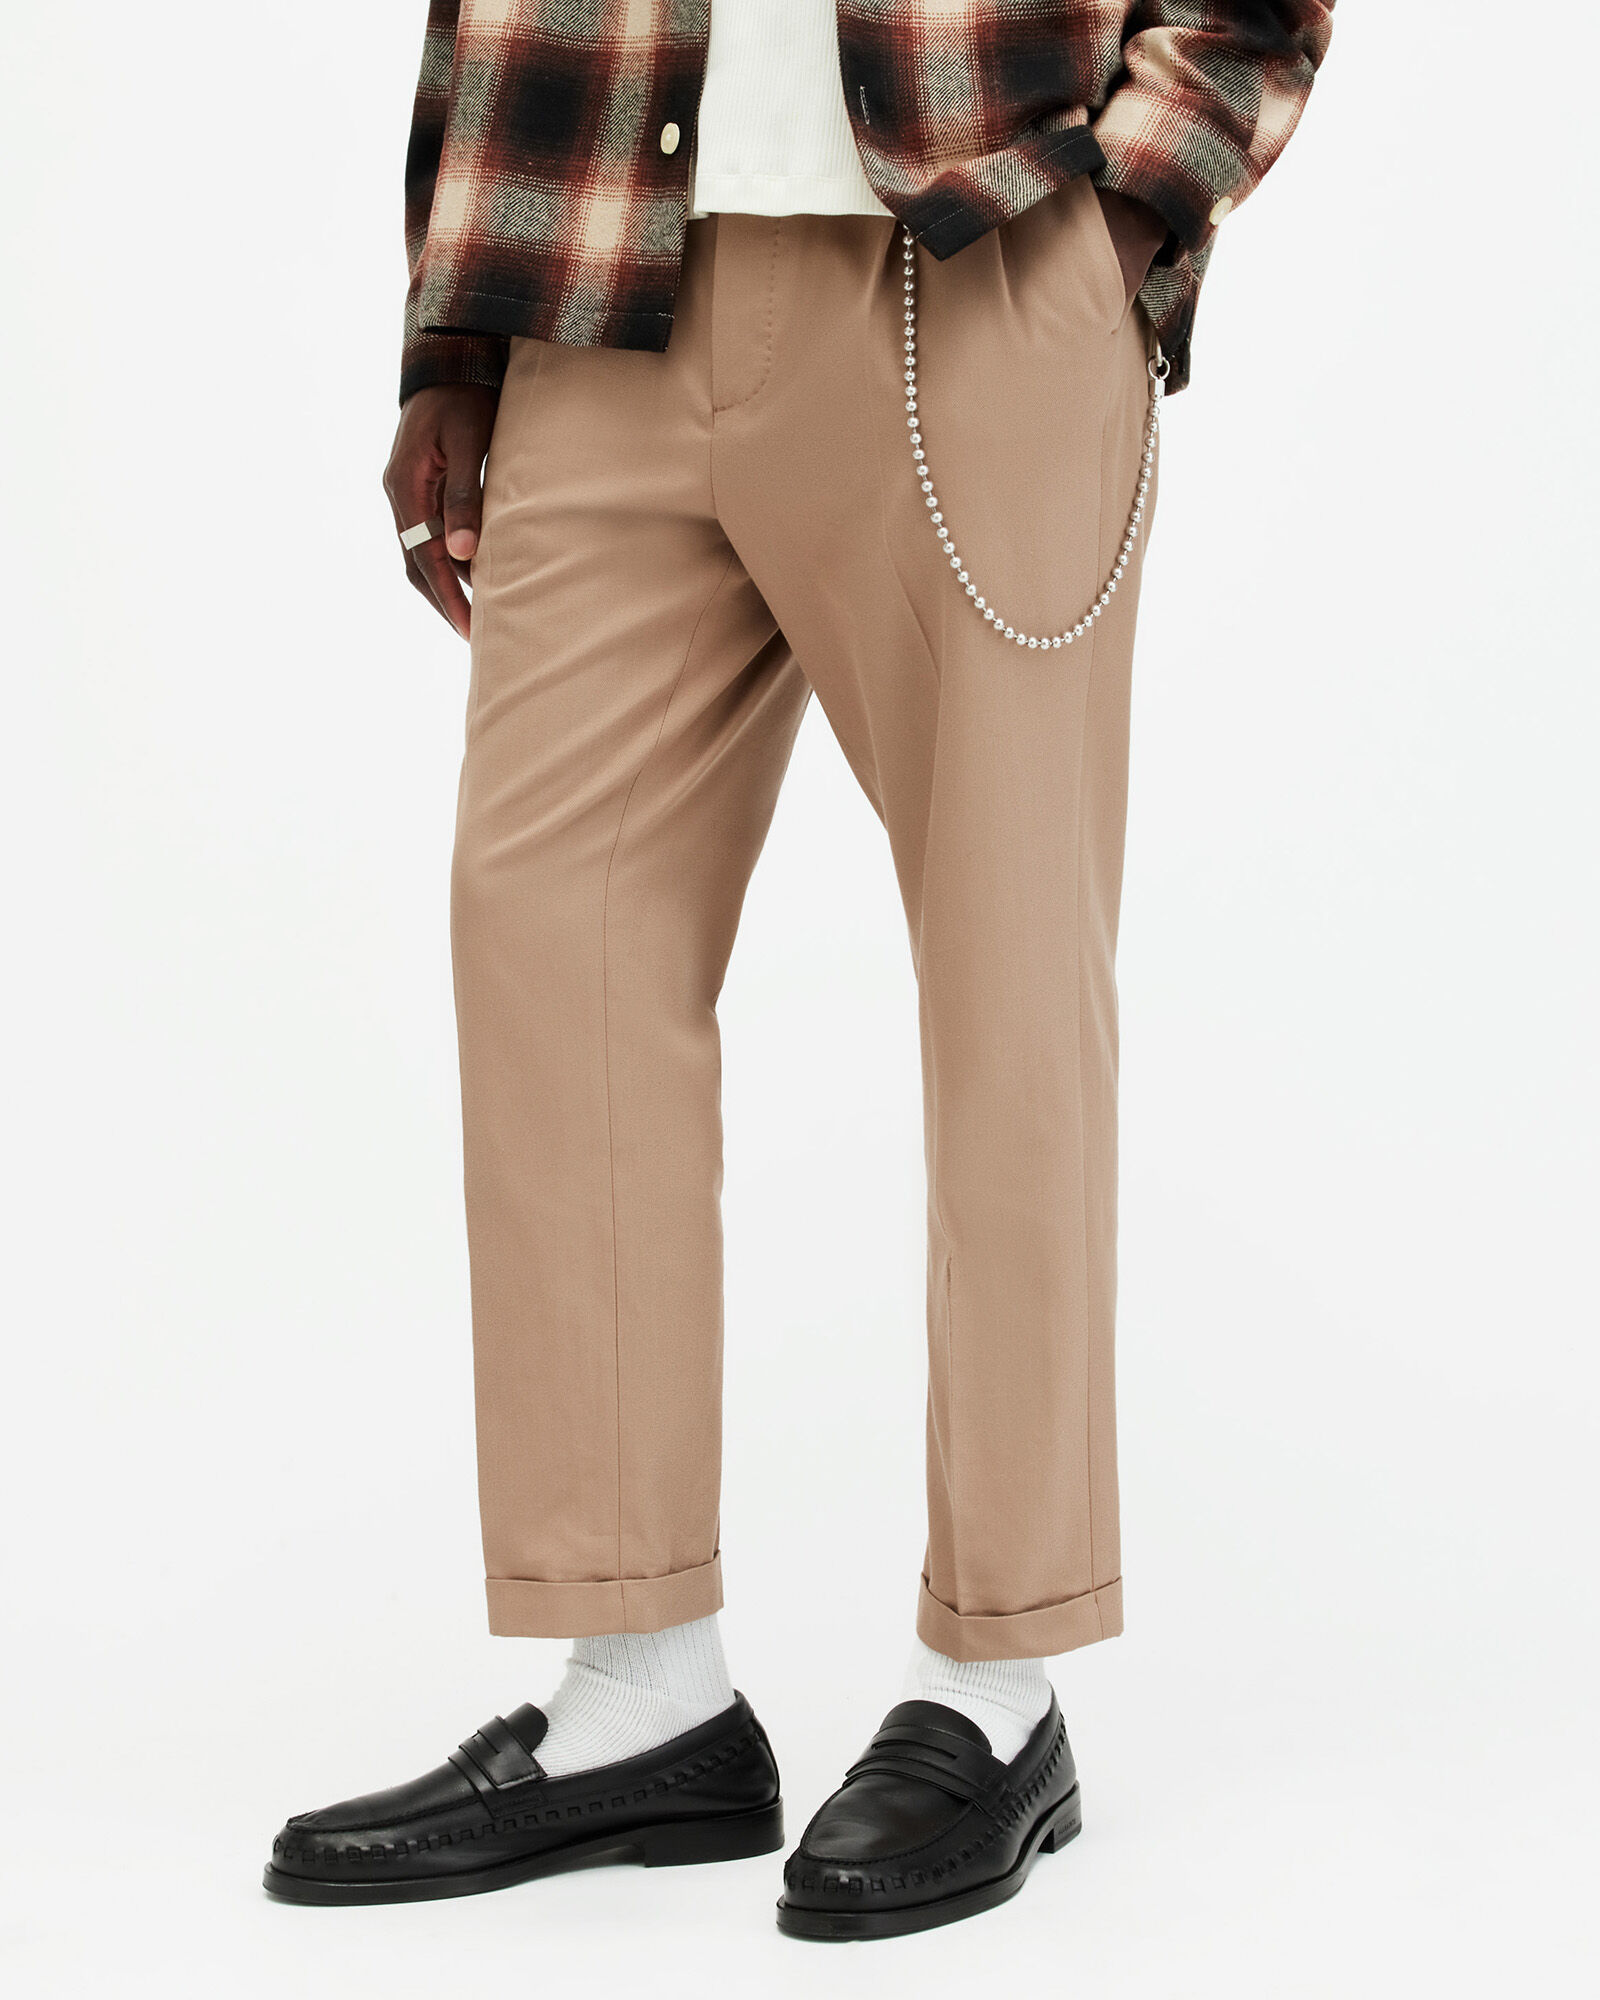 Cropped Cruise Trousers in PRINCE-OF-WALES | Vivienne Westwood®